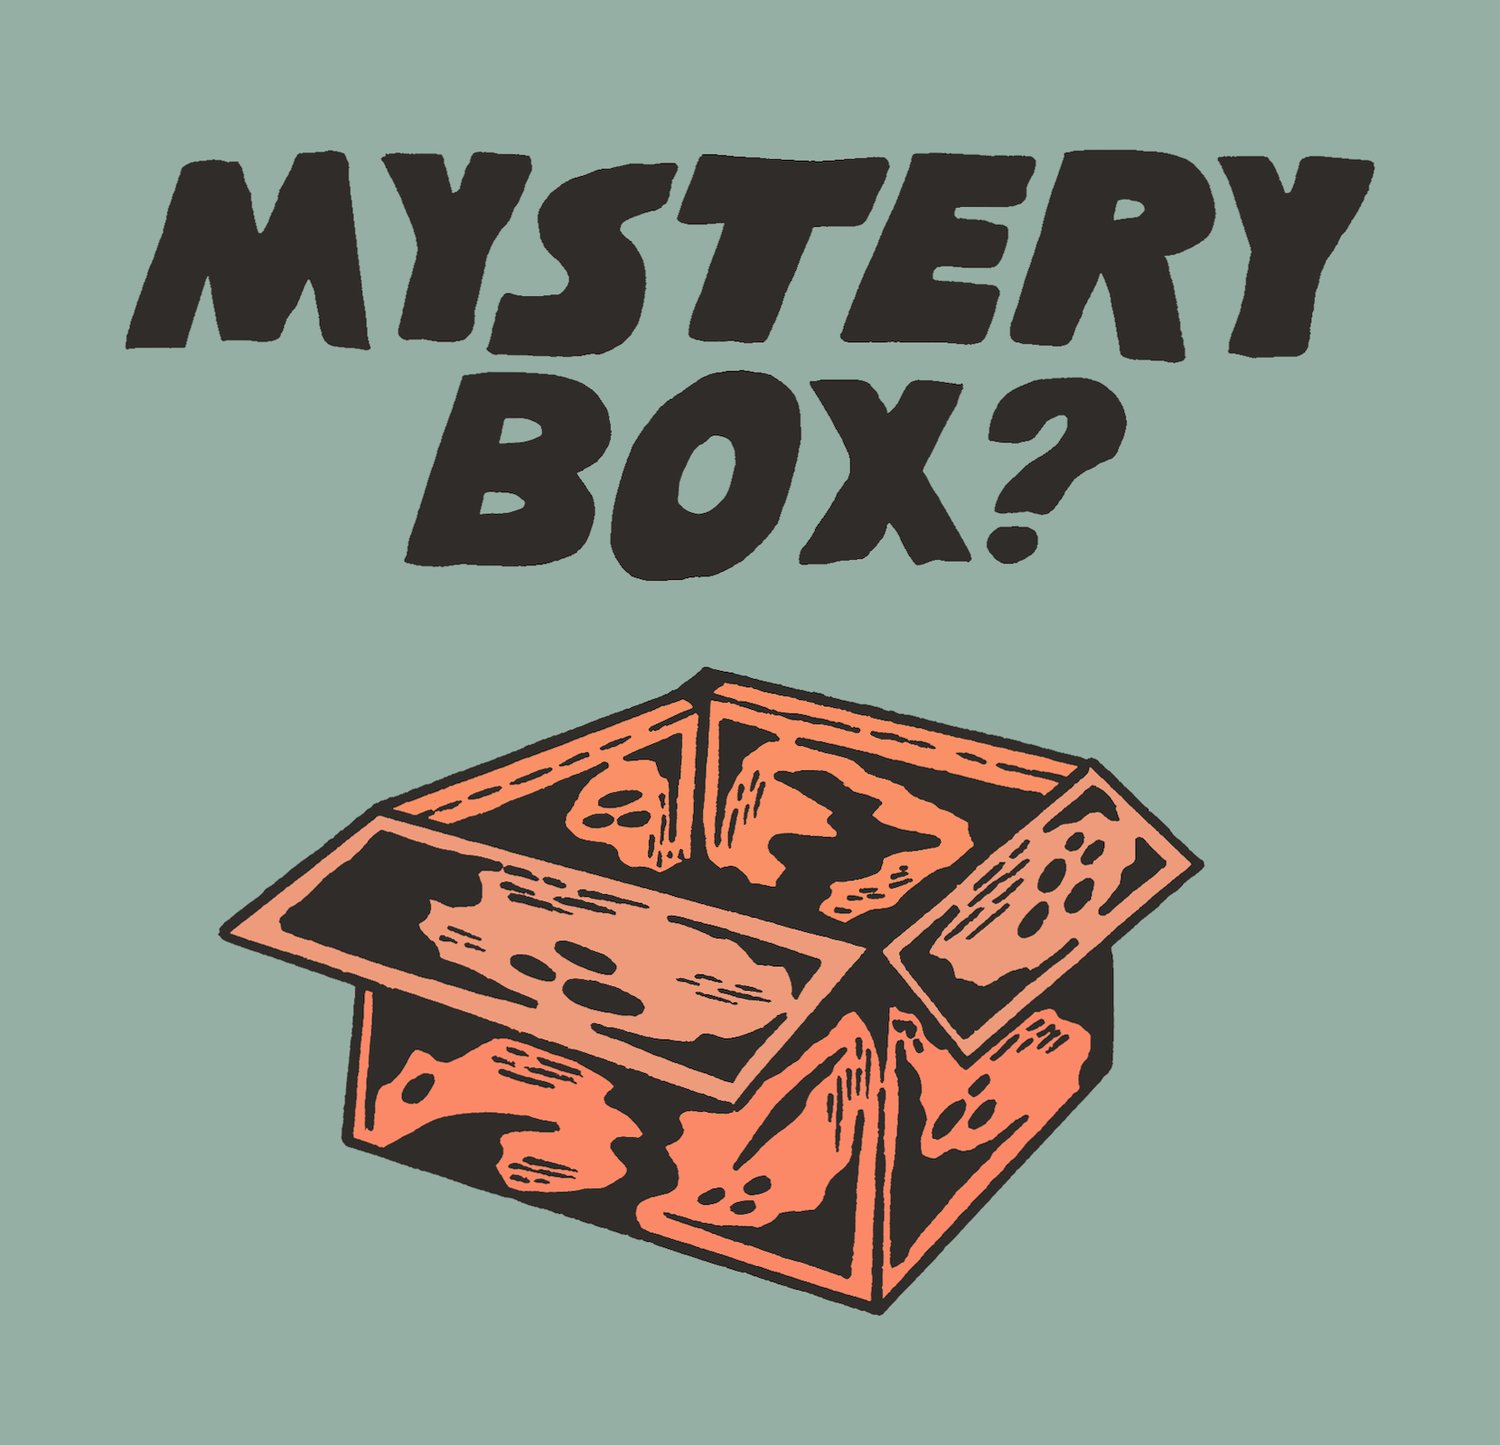 Image of Mystery box